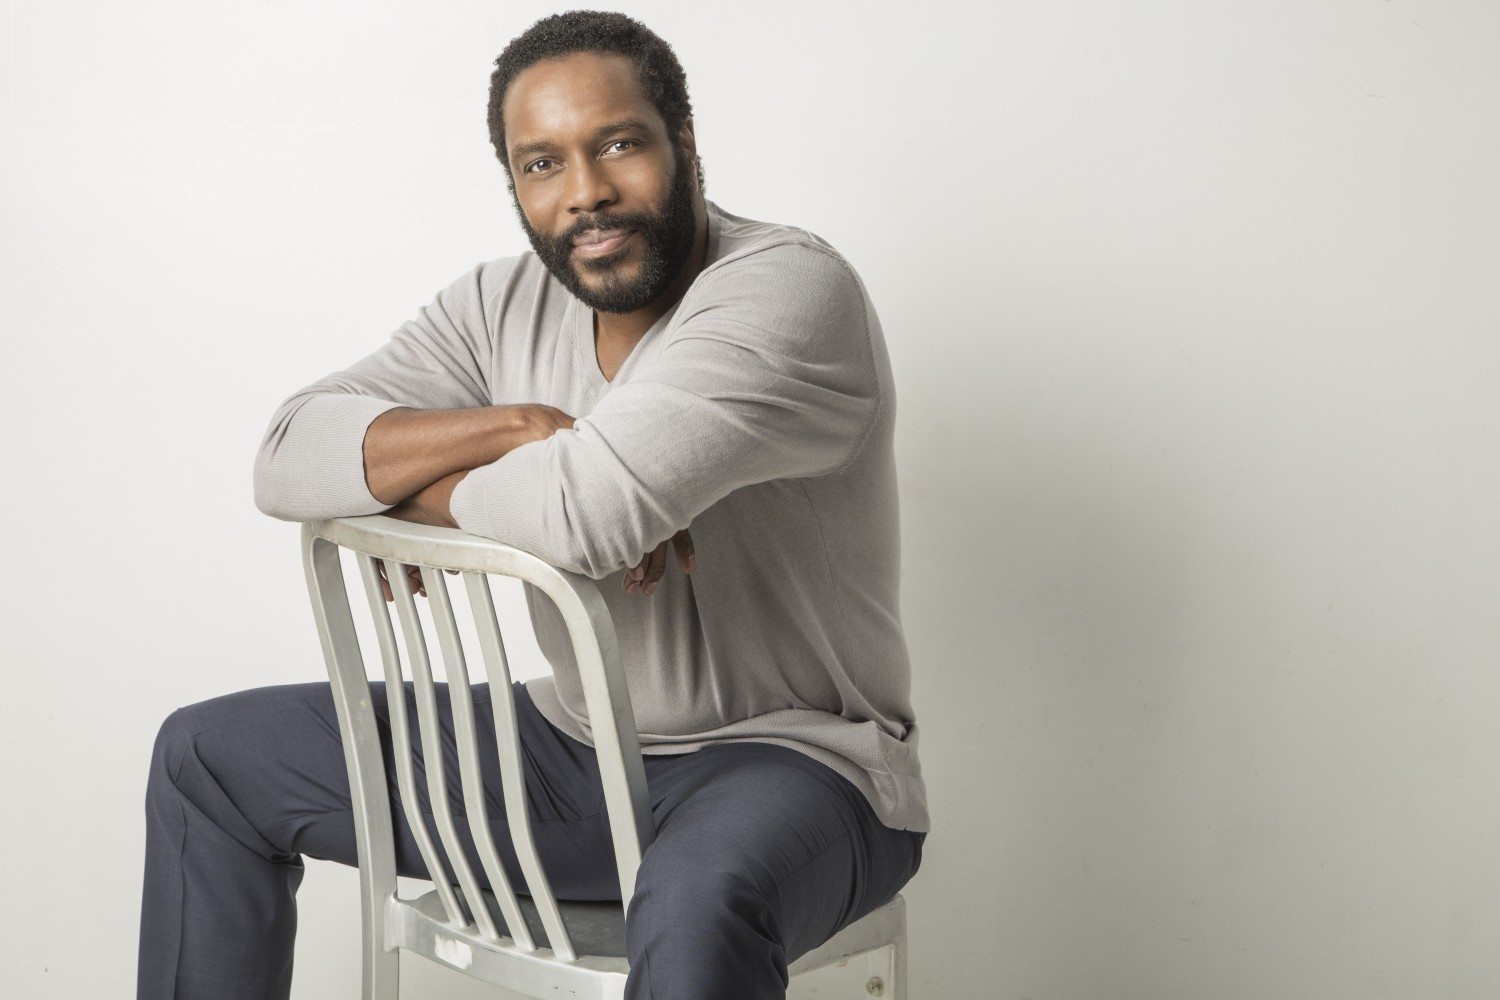 Chad L. Coleman on “The Wire,” “The Walking Dead,” “Arrow” and other great roles of his